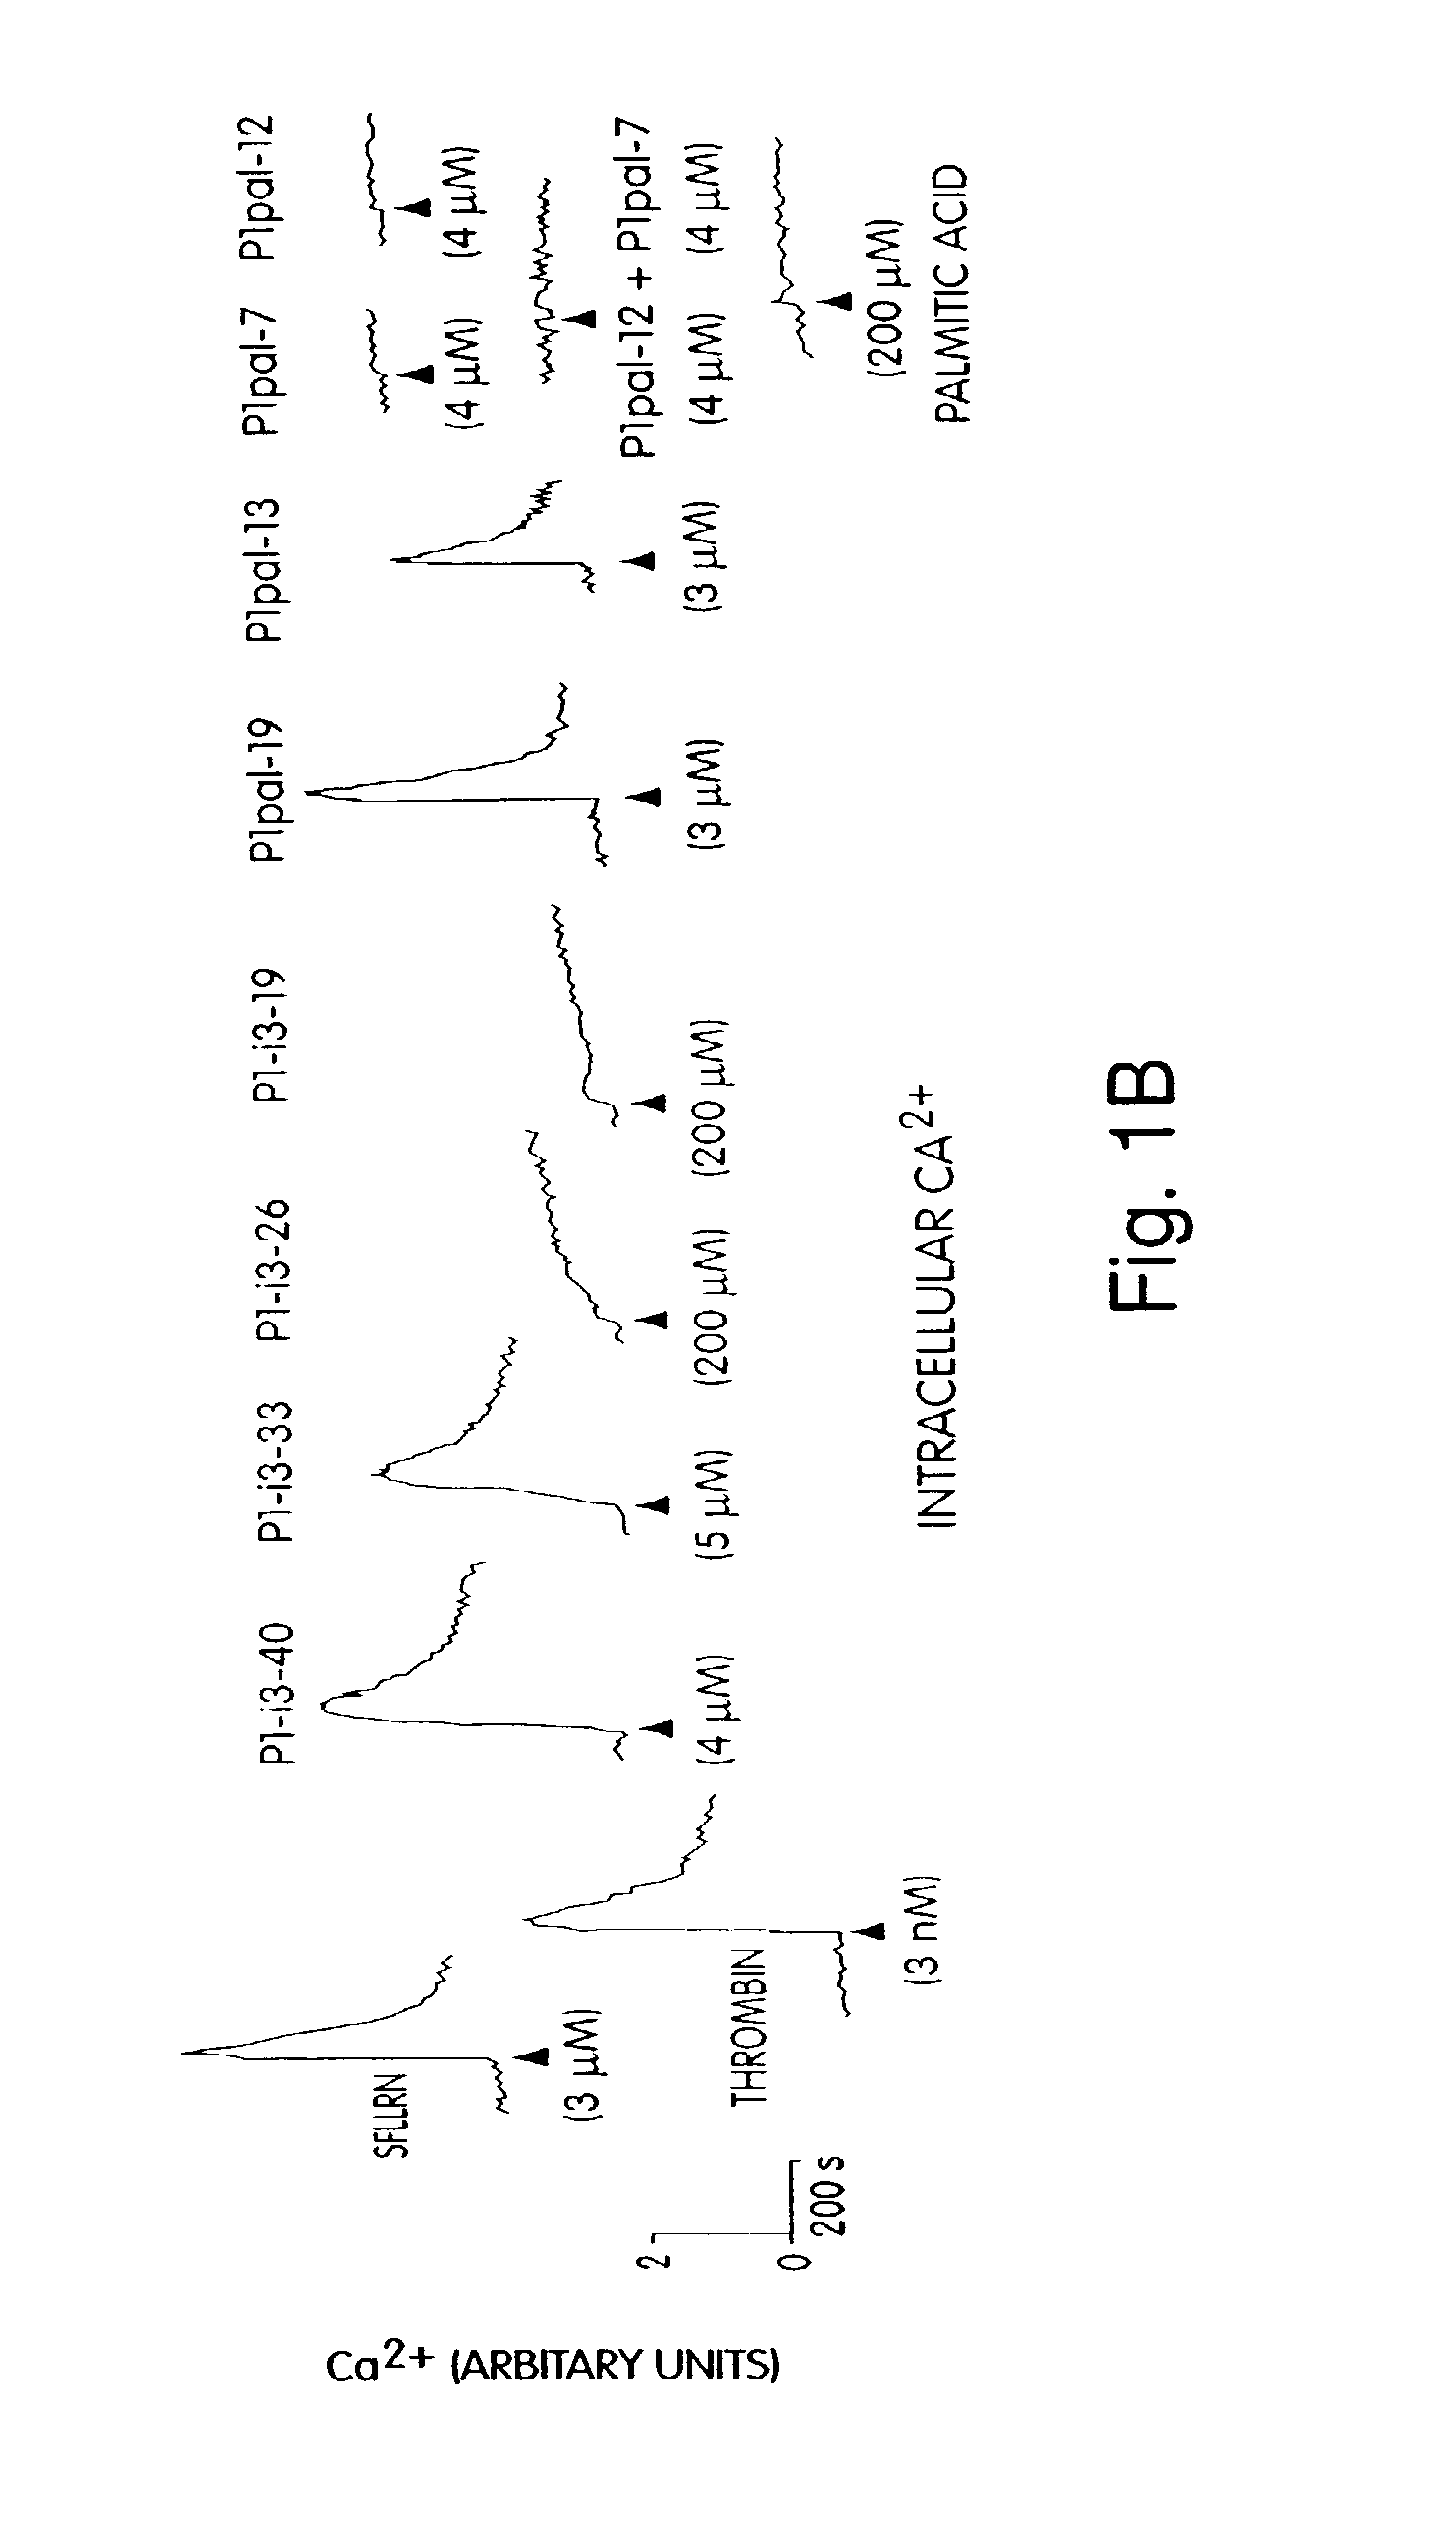 G protein coupled receptor antagonists and methods of activating and inhibiting g protein coupled receptors using the same